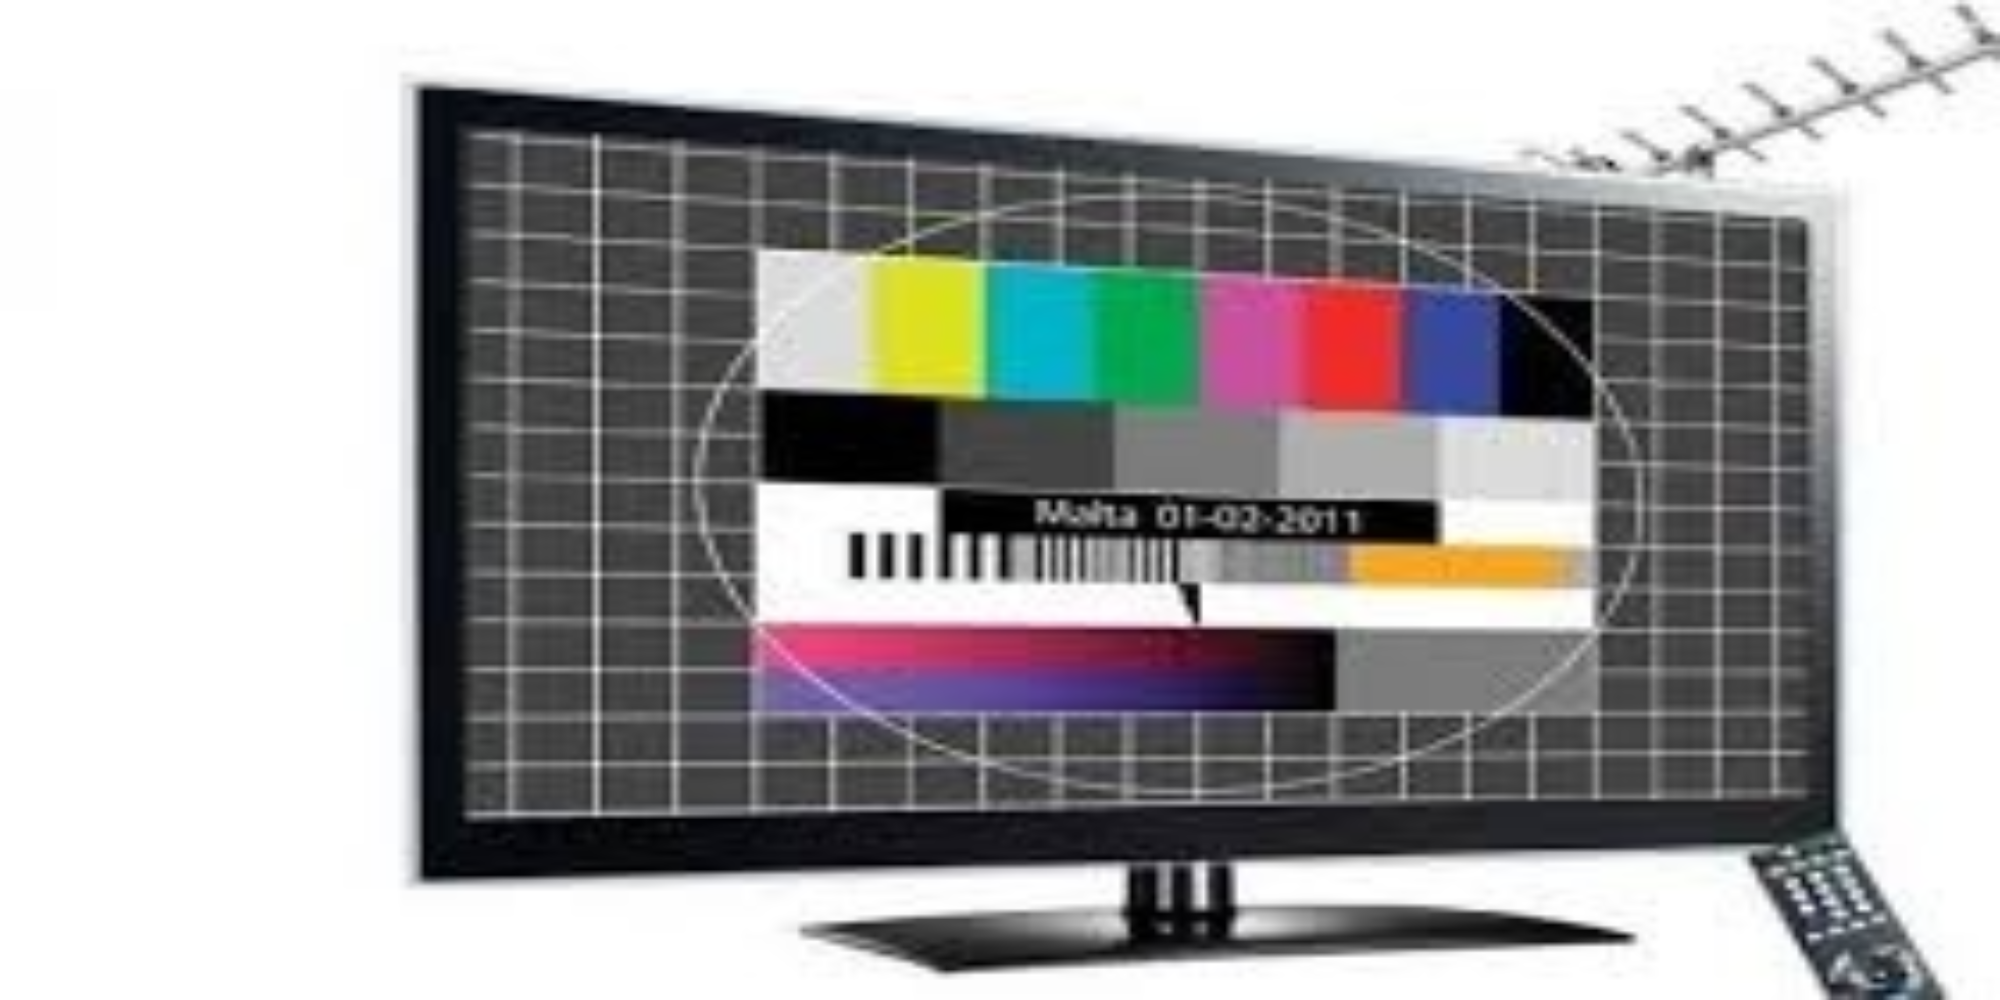 The Digital Terrestrial Television (DTT) Switchover: Why Completion of Implementation Process So Important